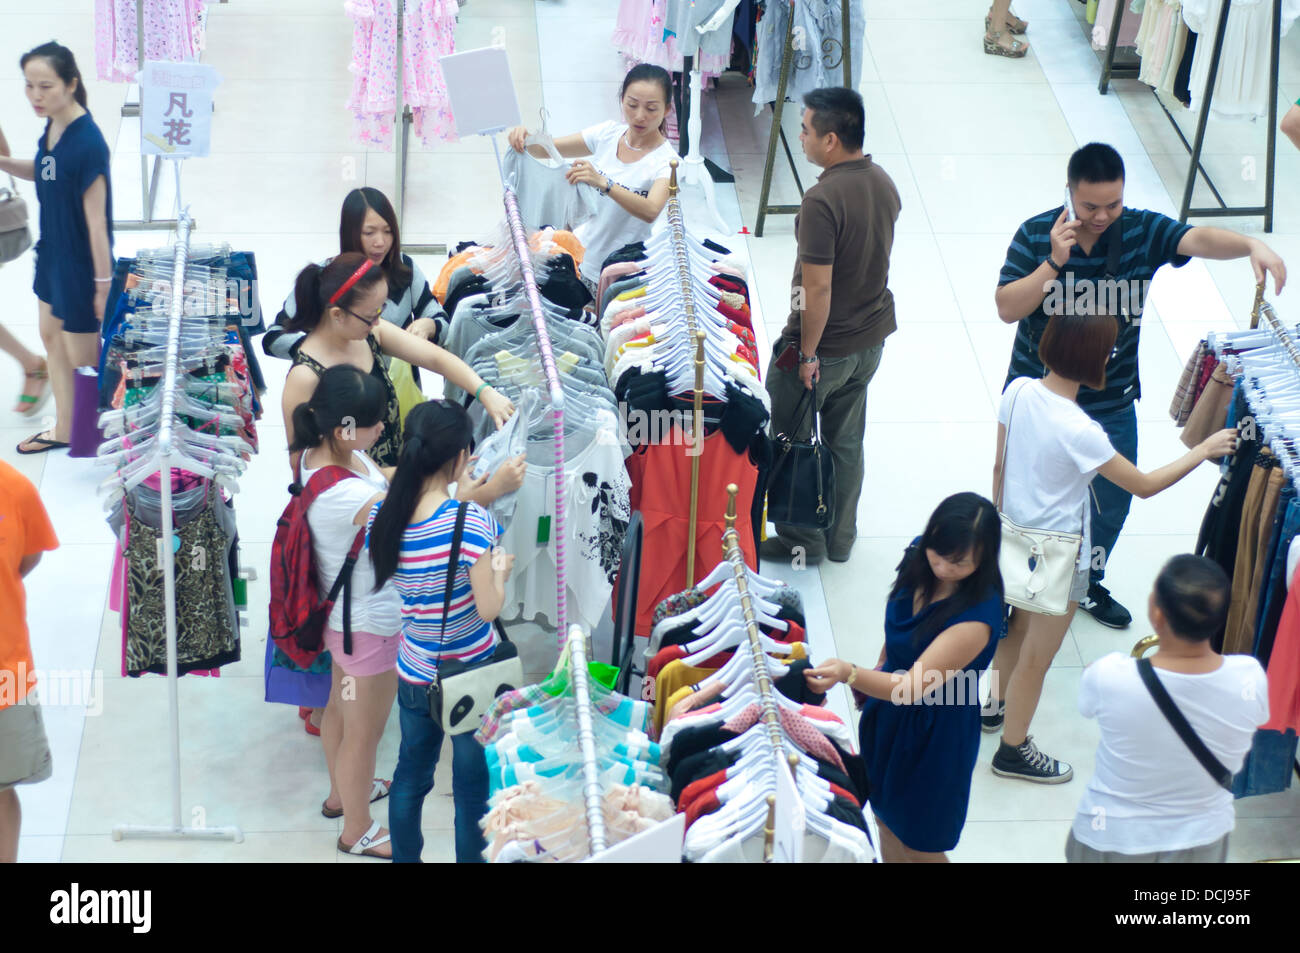 People shopping inside a mall Stock Photo